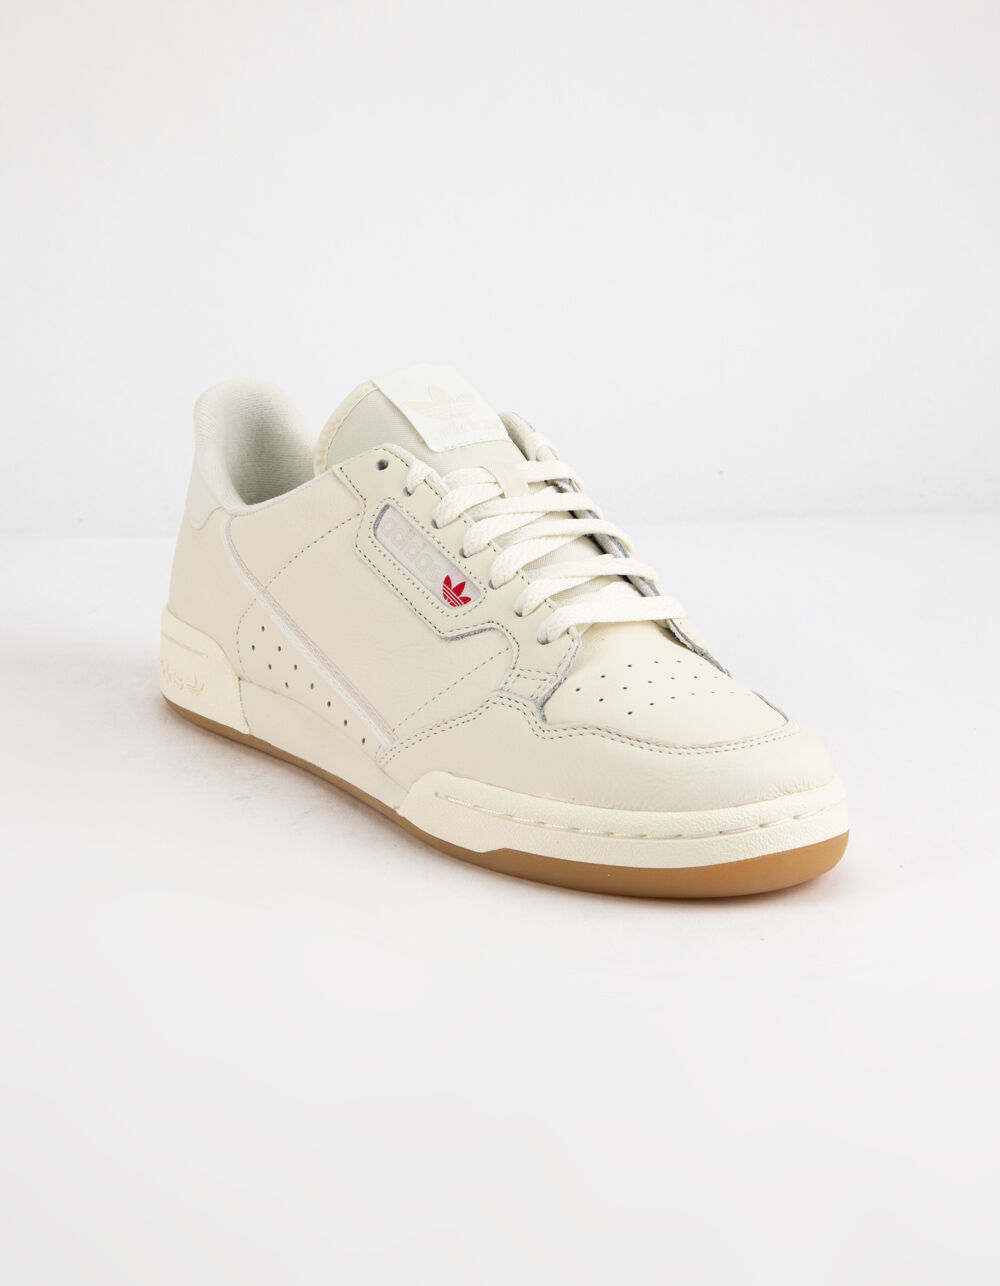 ADIDAS Continental 80 Off White & Gum Shoes - WHITE - 335111150